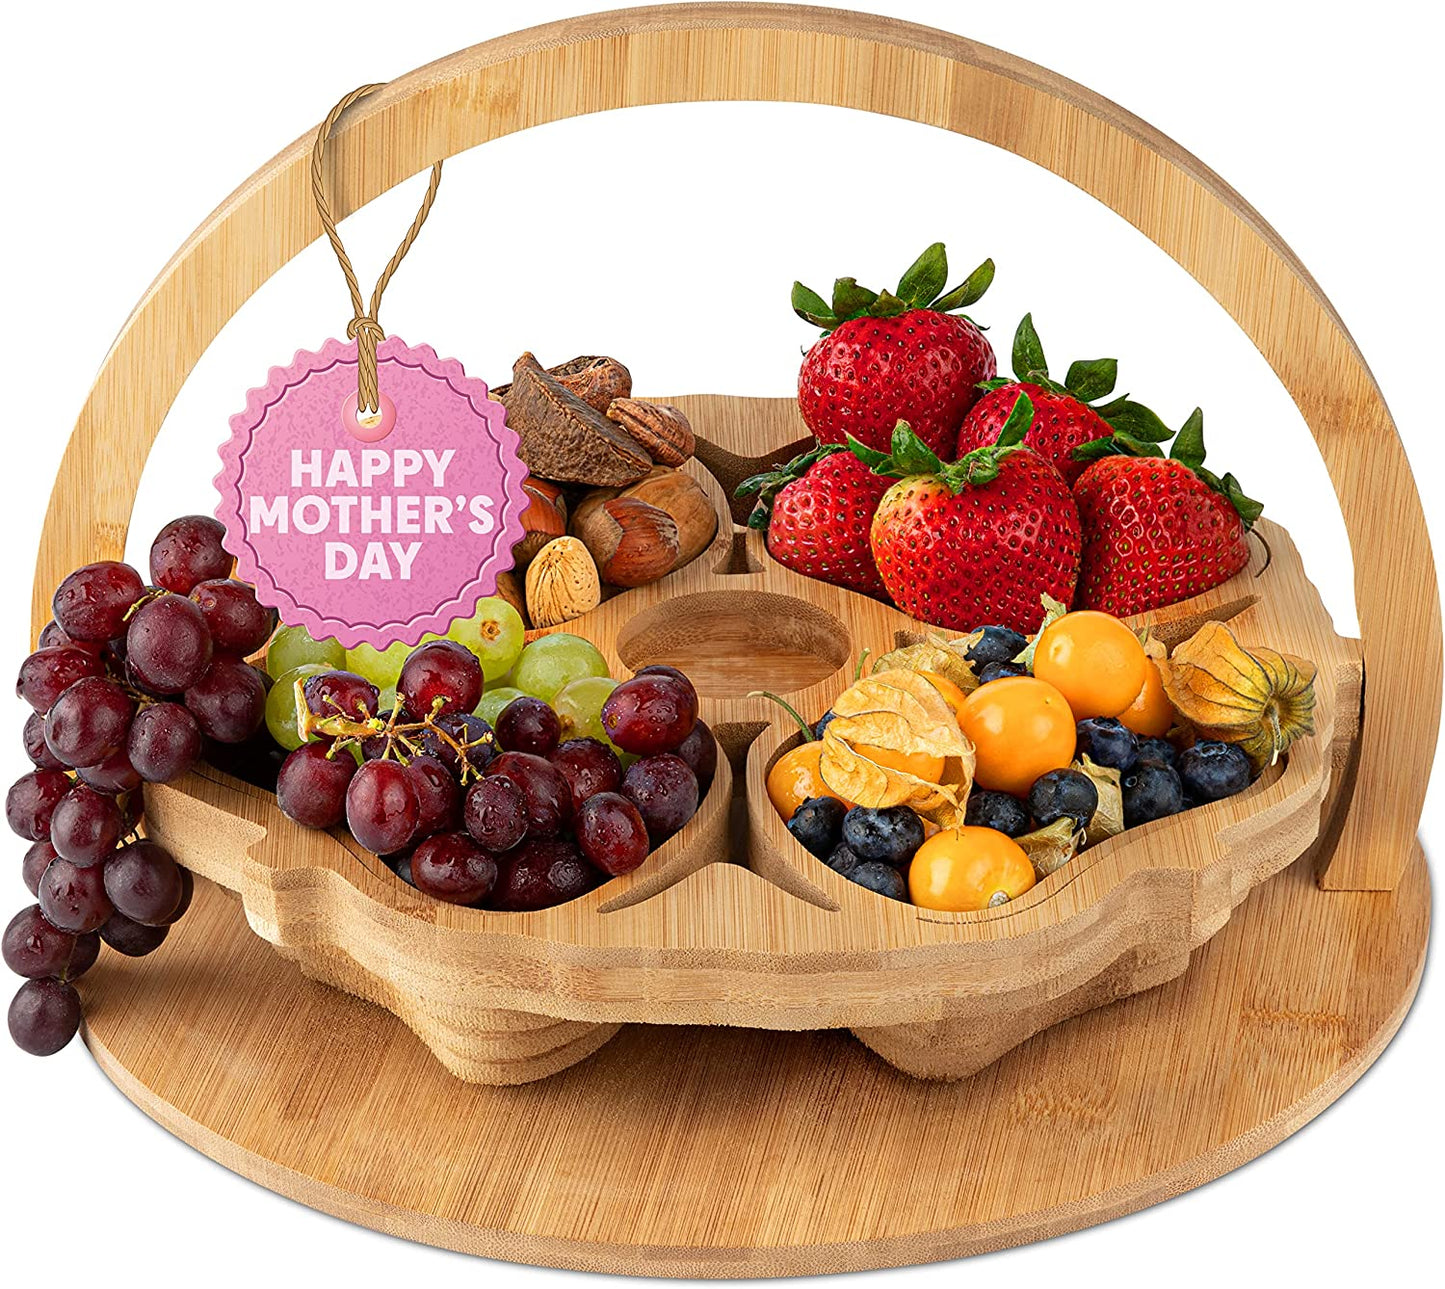 New Mothers Day Gifts From Daughter, Decorative Fruit Nuts And Candy Serving Tray, Gift From Daughter Son Husband For Wife Sister Mom Grandma, Trays Set Basket Ideas Prime Delivery Food Safe Empty Baskets